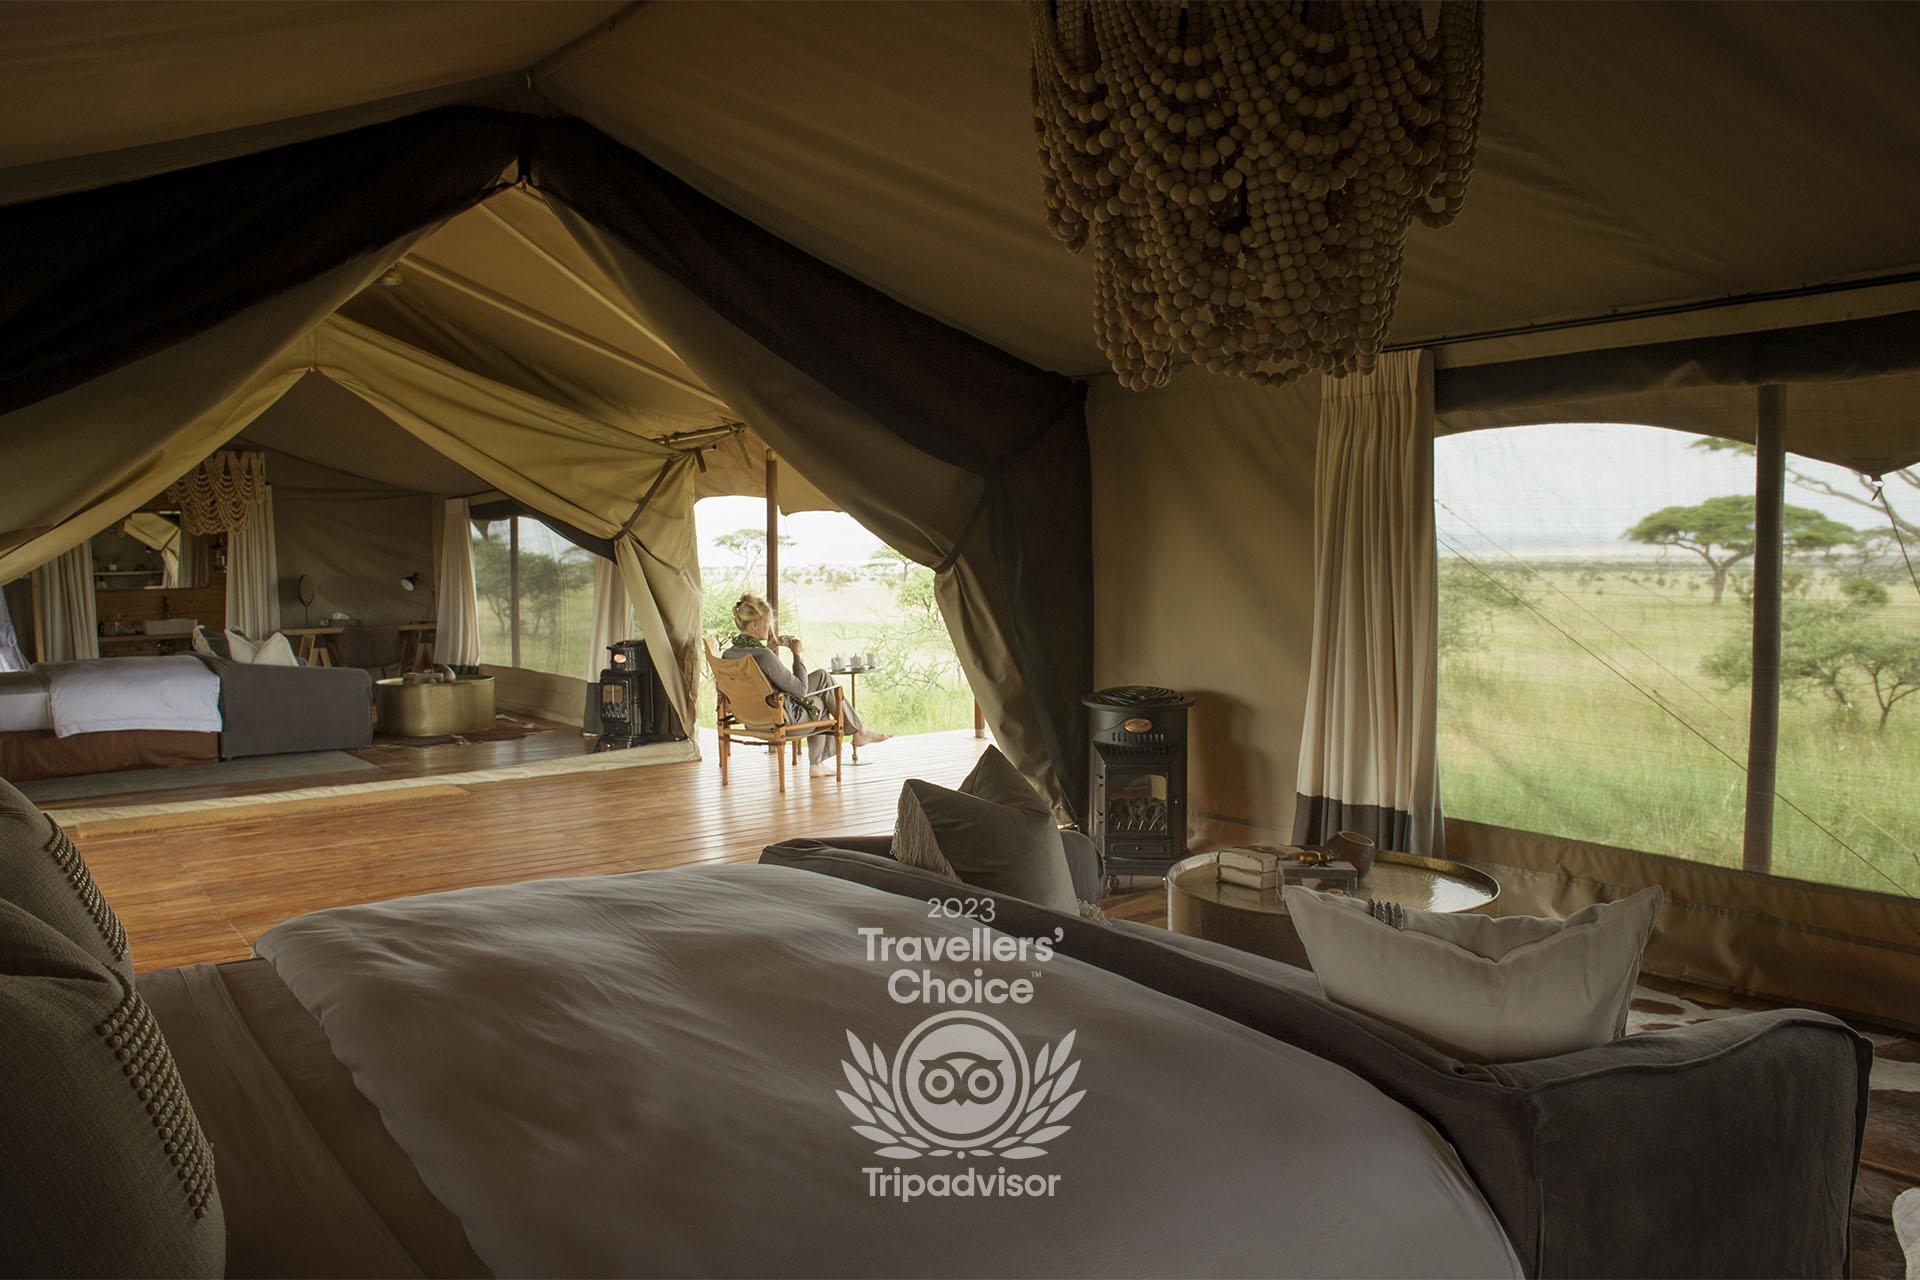 A two-bedroomed family tent will also is available for guests travelling with (small) children. An ensuite bathroom with “his and hers” wash hand basins, large shower and proper flush toilet will complete each guest tent